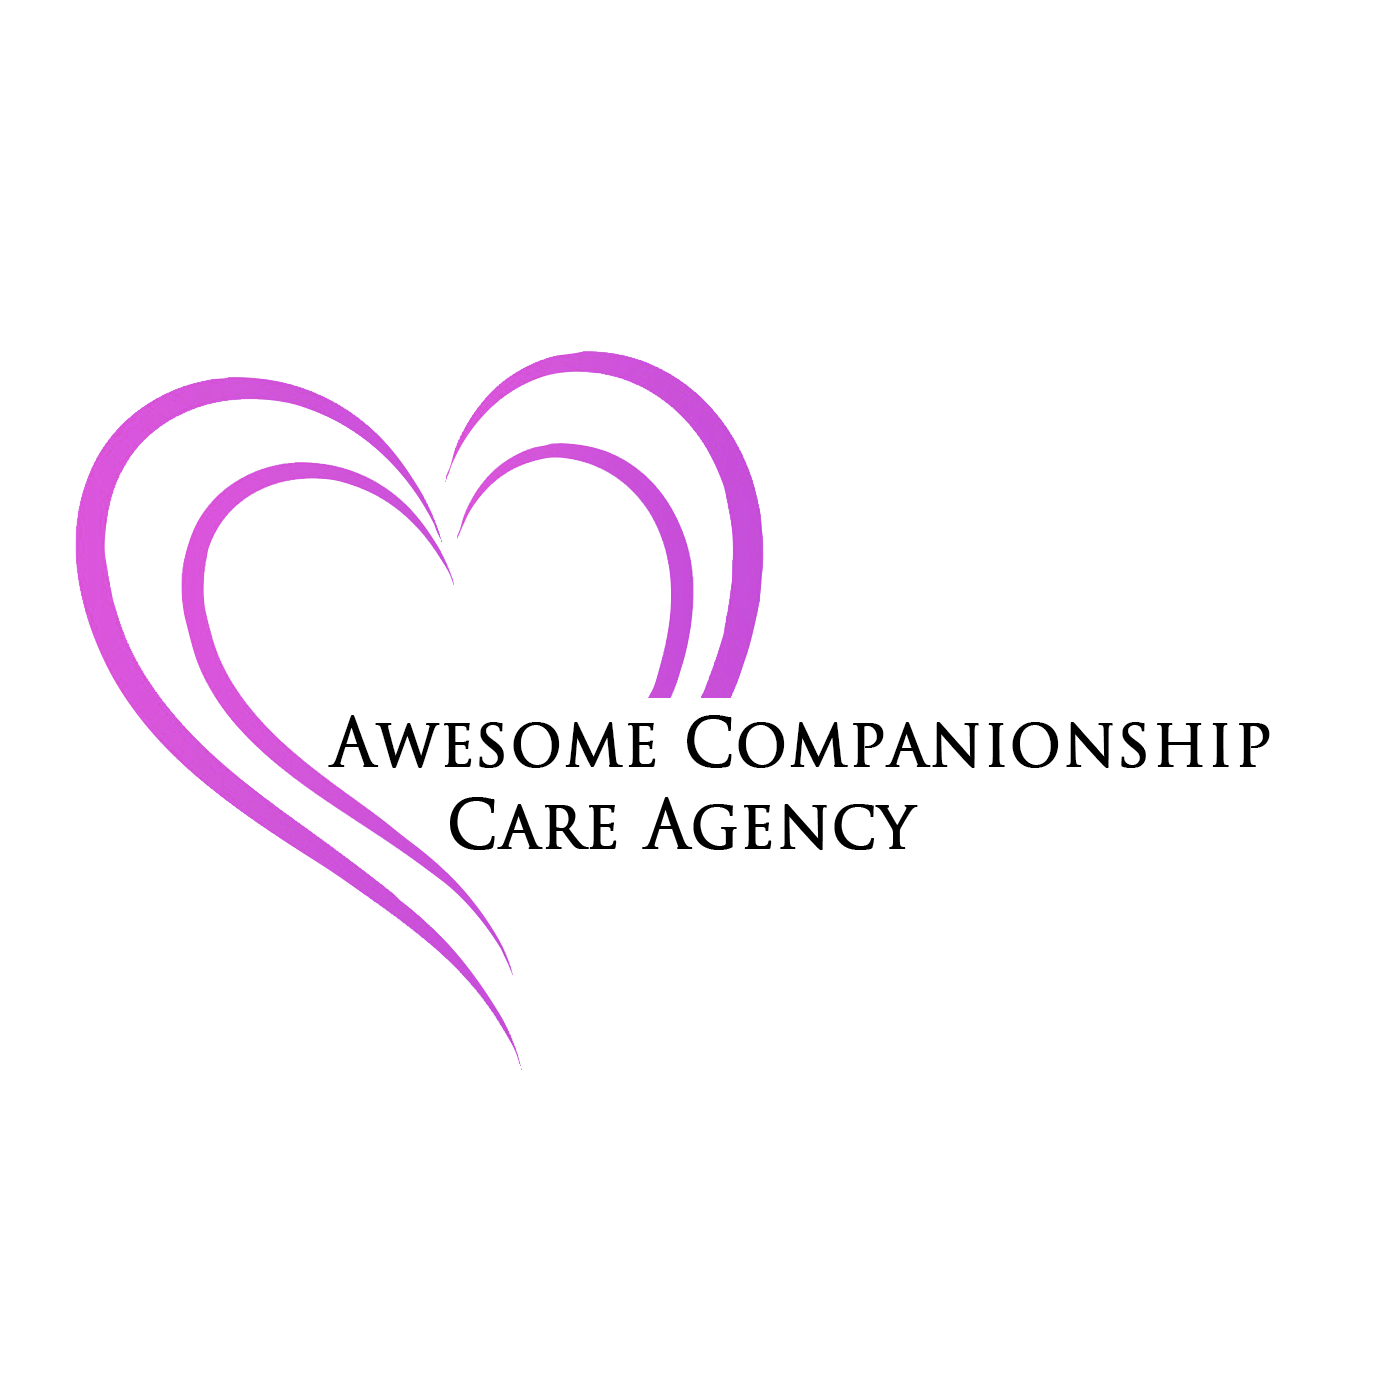 Awesome Companionship Care Agency